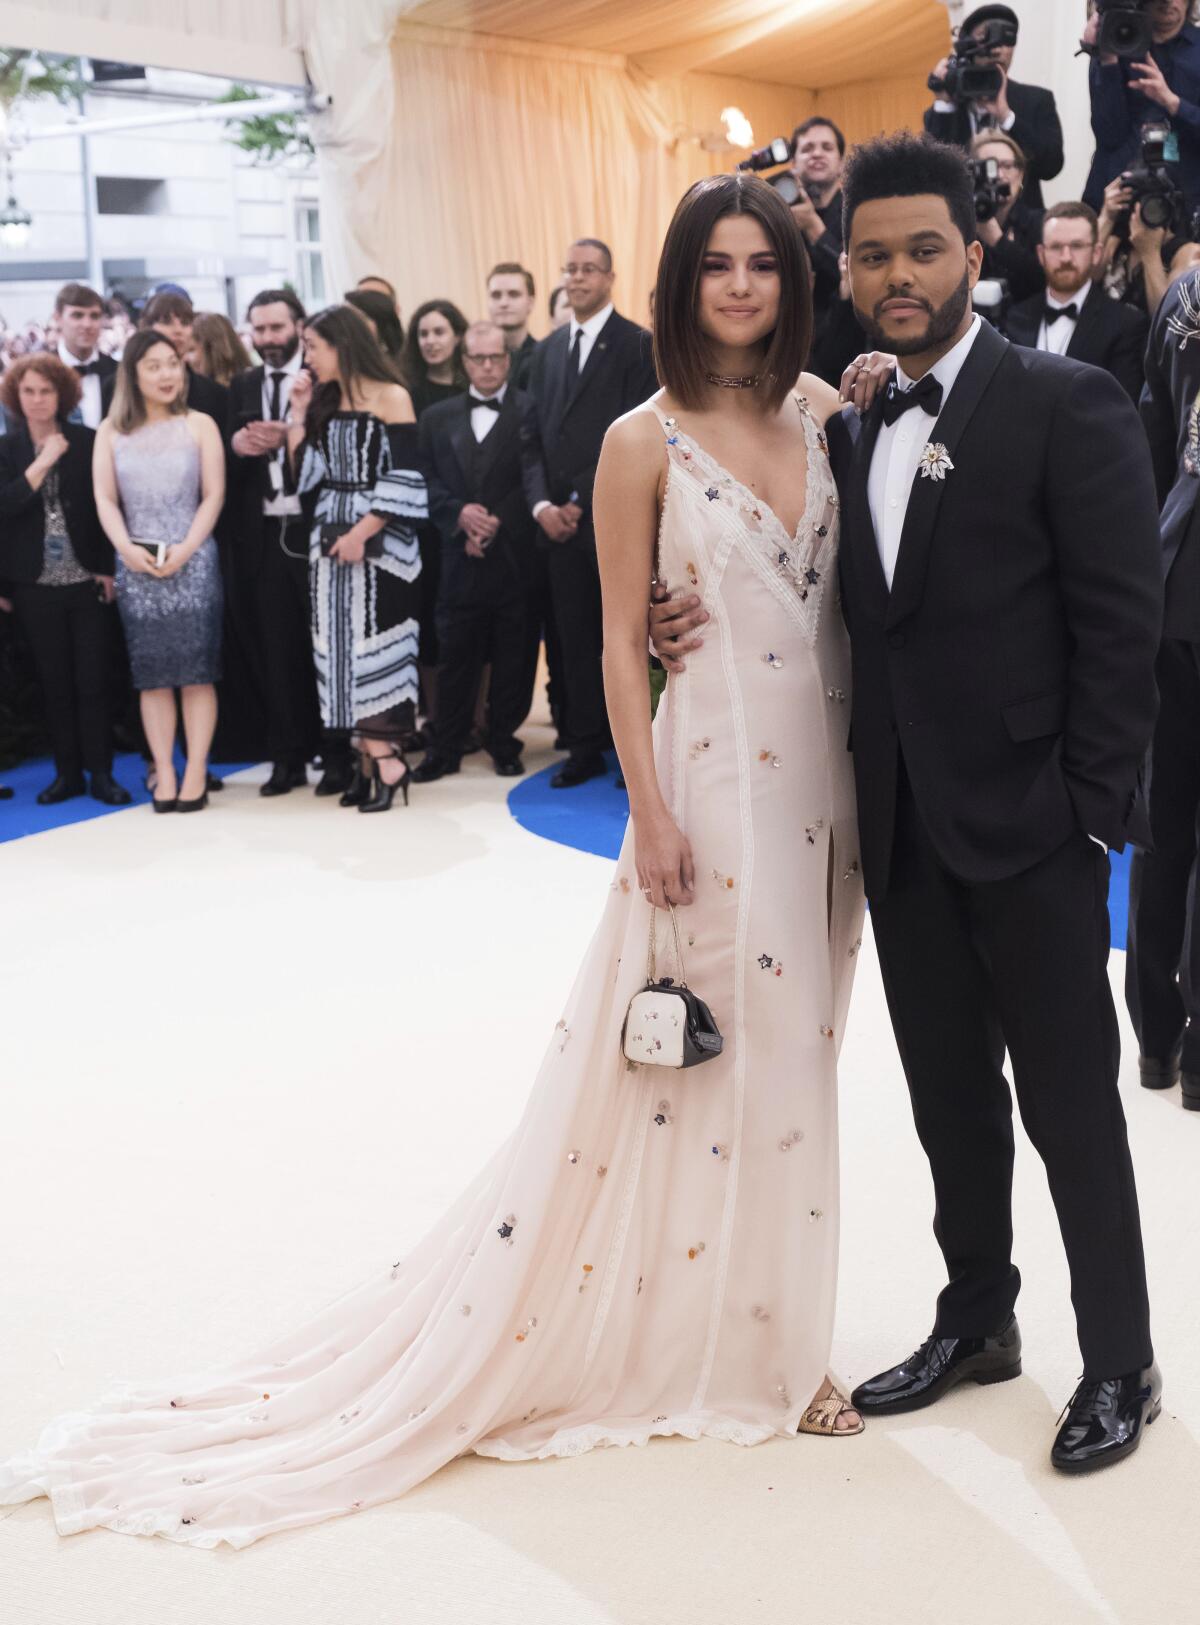 Met Gala 2017: Selena Gomez Reportedly Whispered I Love You to